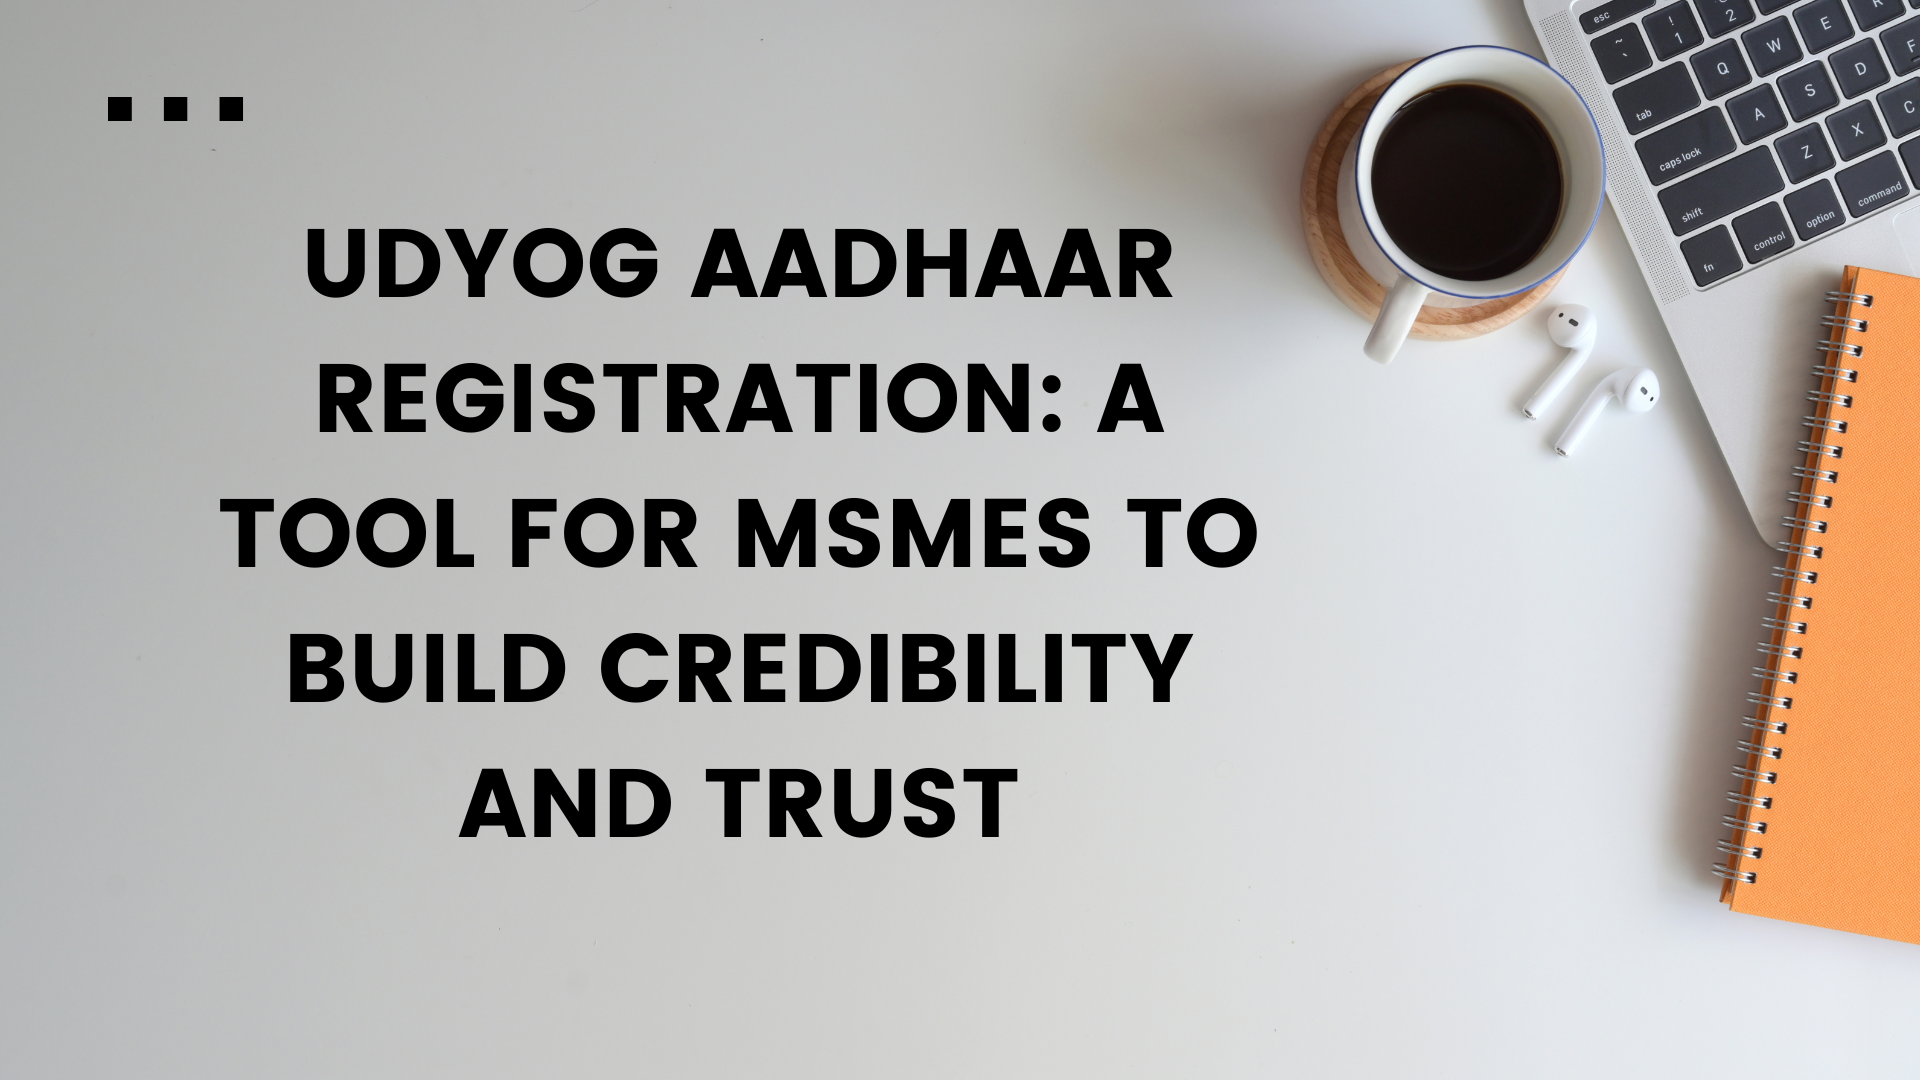 Udyog Aadhaar Registration: A Tool for MSMEs to Build Credibility and Trust